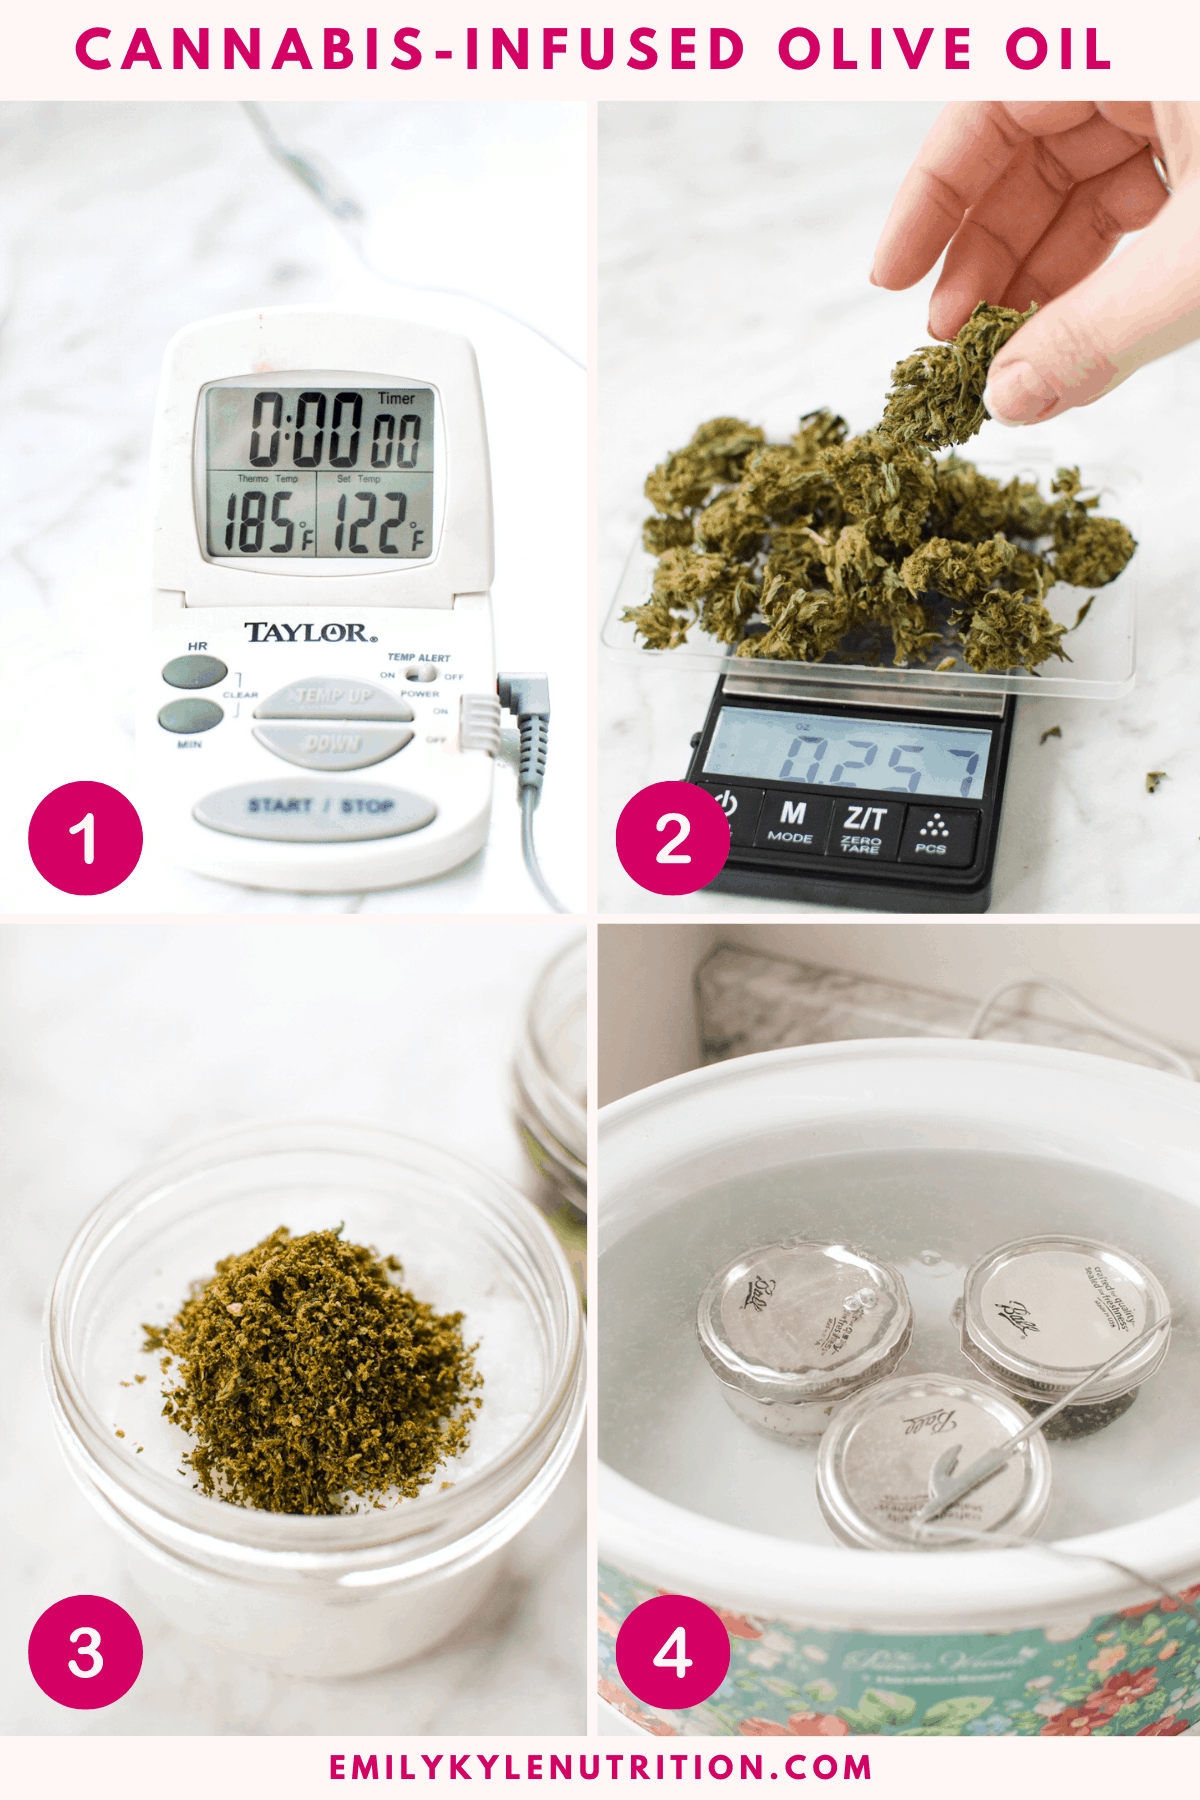 A collage image of four photos showing the first four steps of setting up the process including a thermometer at 185 degrees, measuring the flower with a scale, adding it to the olive oil, and putting it in the water bath.